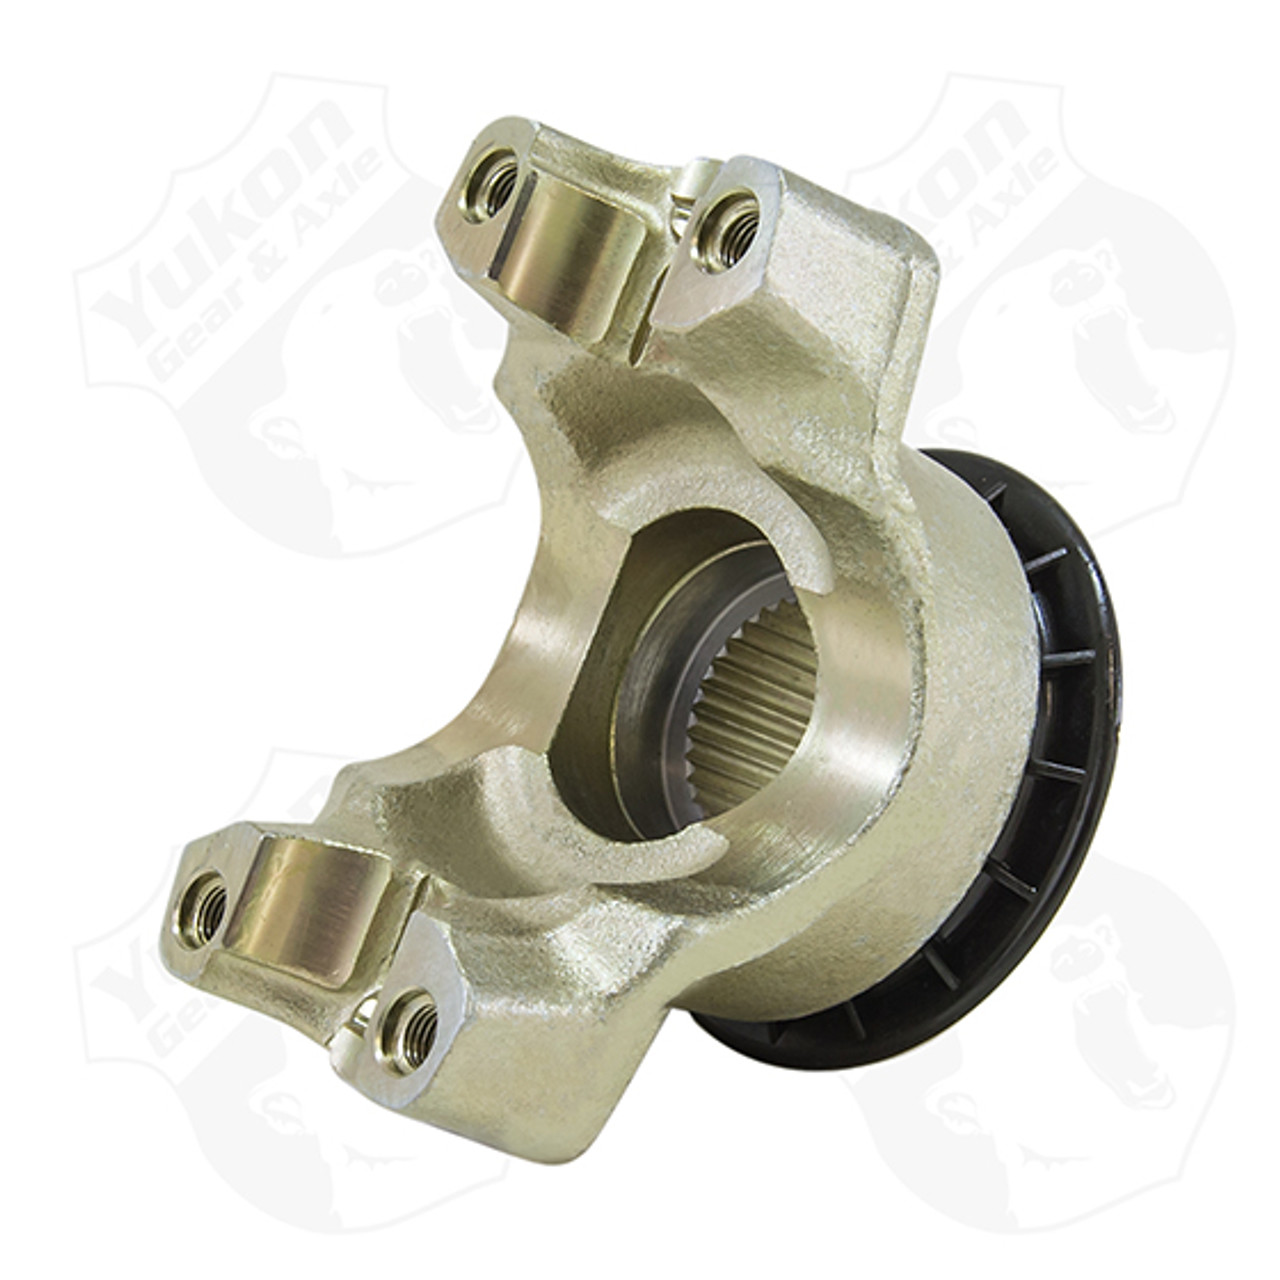 Yukon short yoke for '92 and older Ford 10.25" and 10.5" with a 1410 U/Joint size